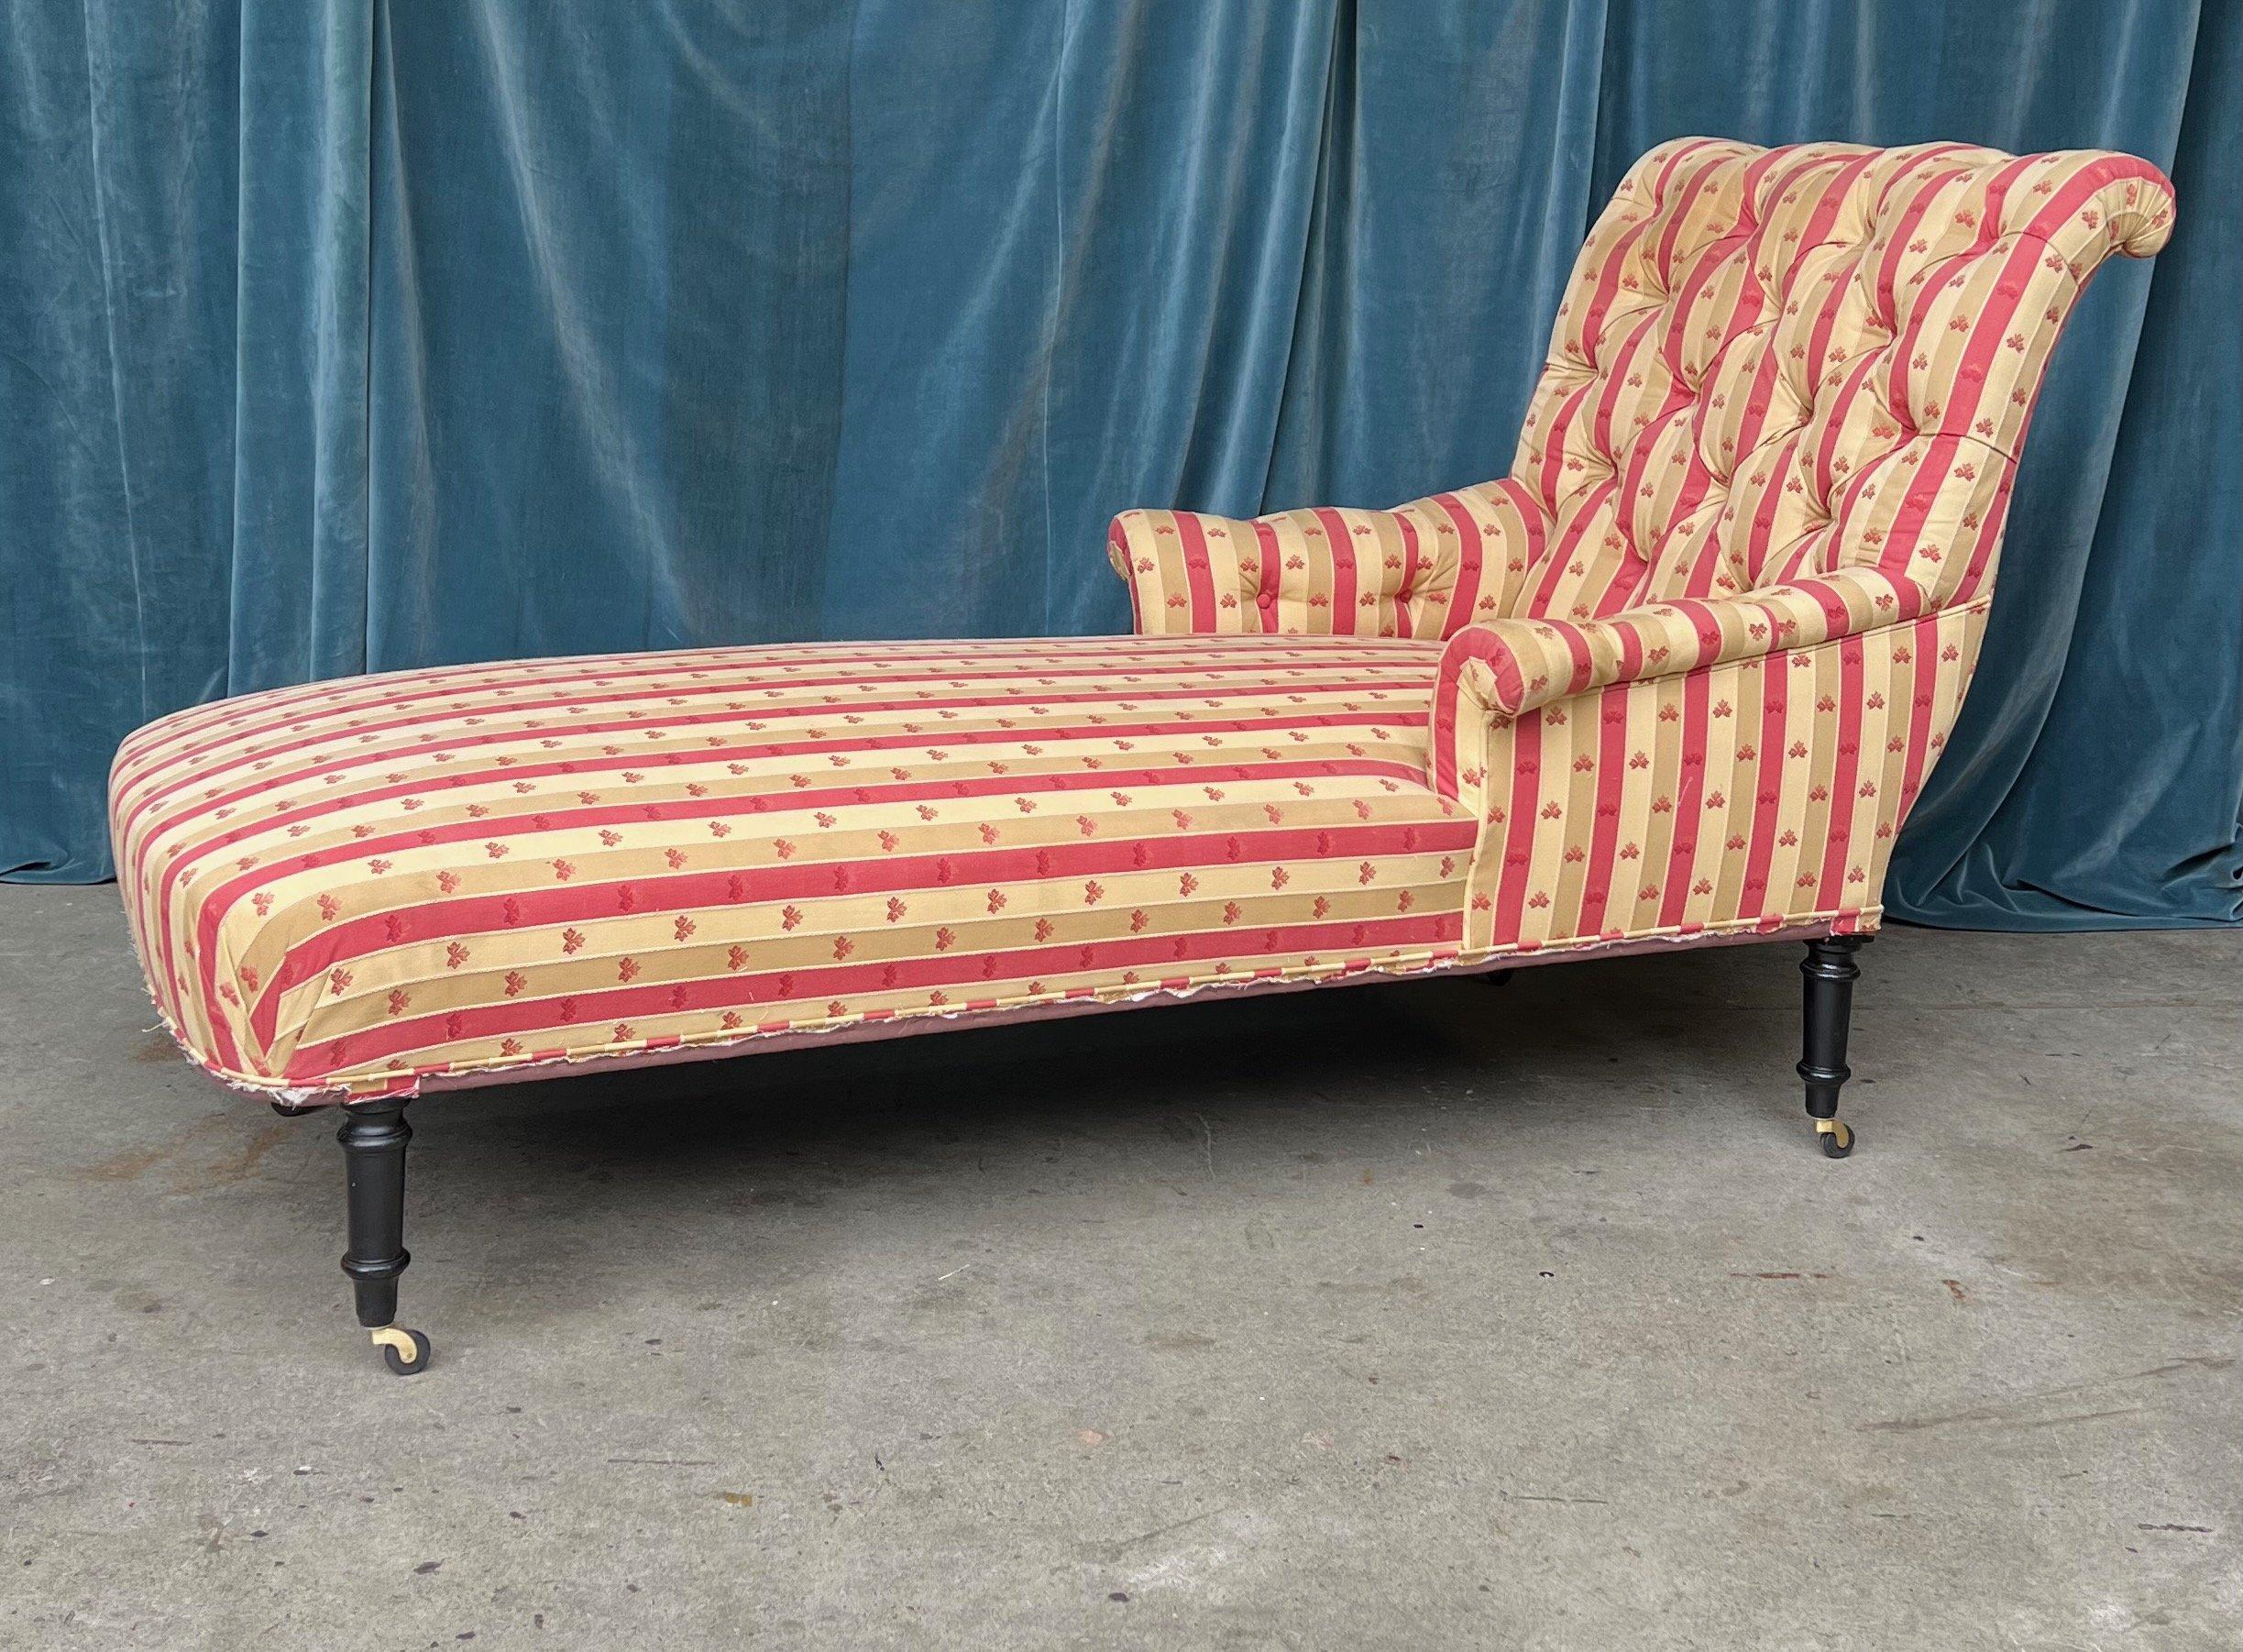 An exquisite French Napoleon III chaise lounge. Take comfort and relaxation to a whole new level with this attractive French late 19th century Napoleon III scrolled back chaise longue. Recently upholstered in a beautiful patterned striped fabric,